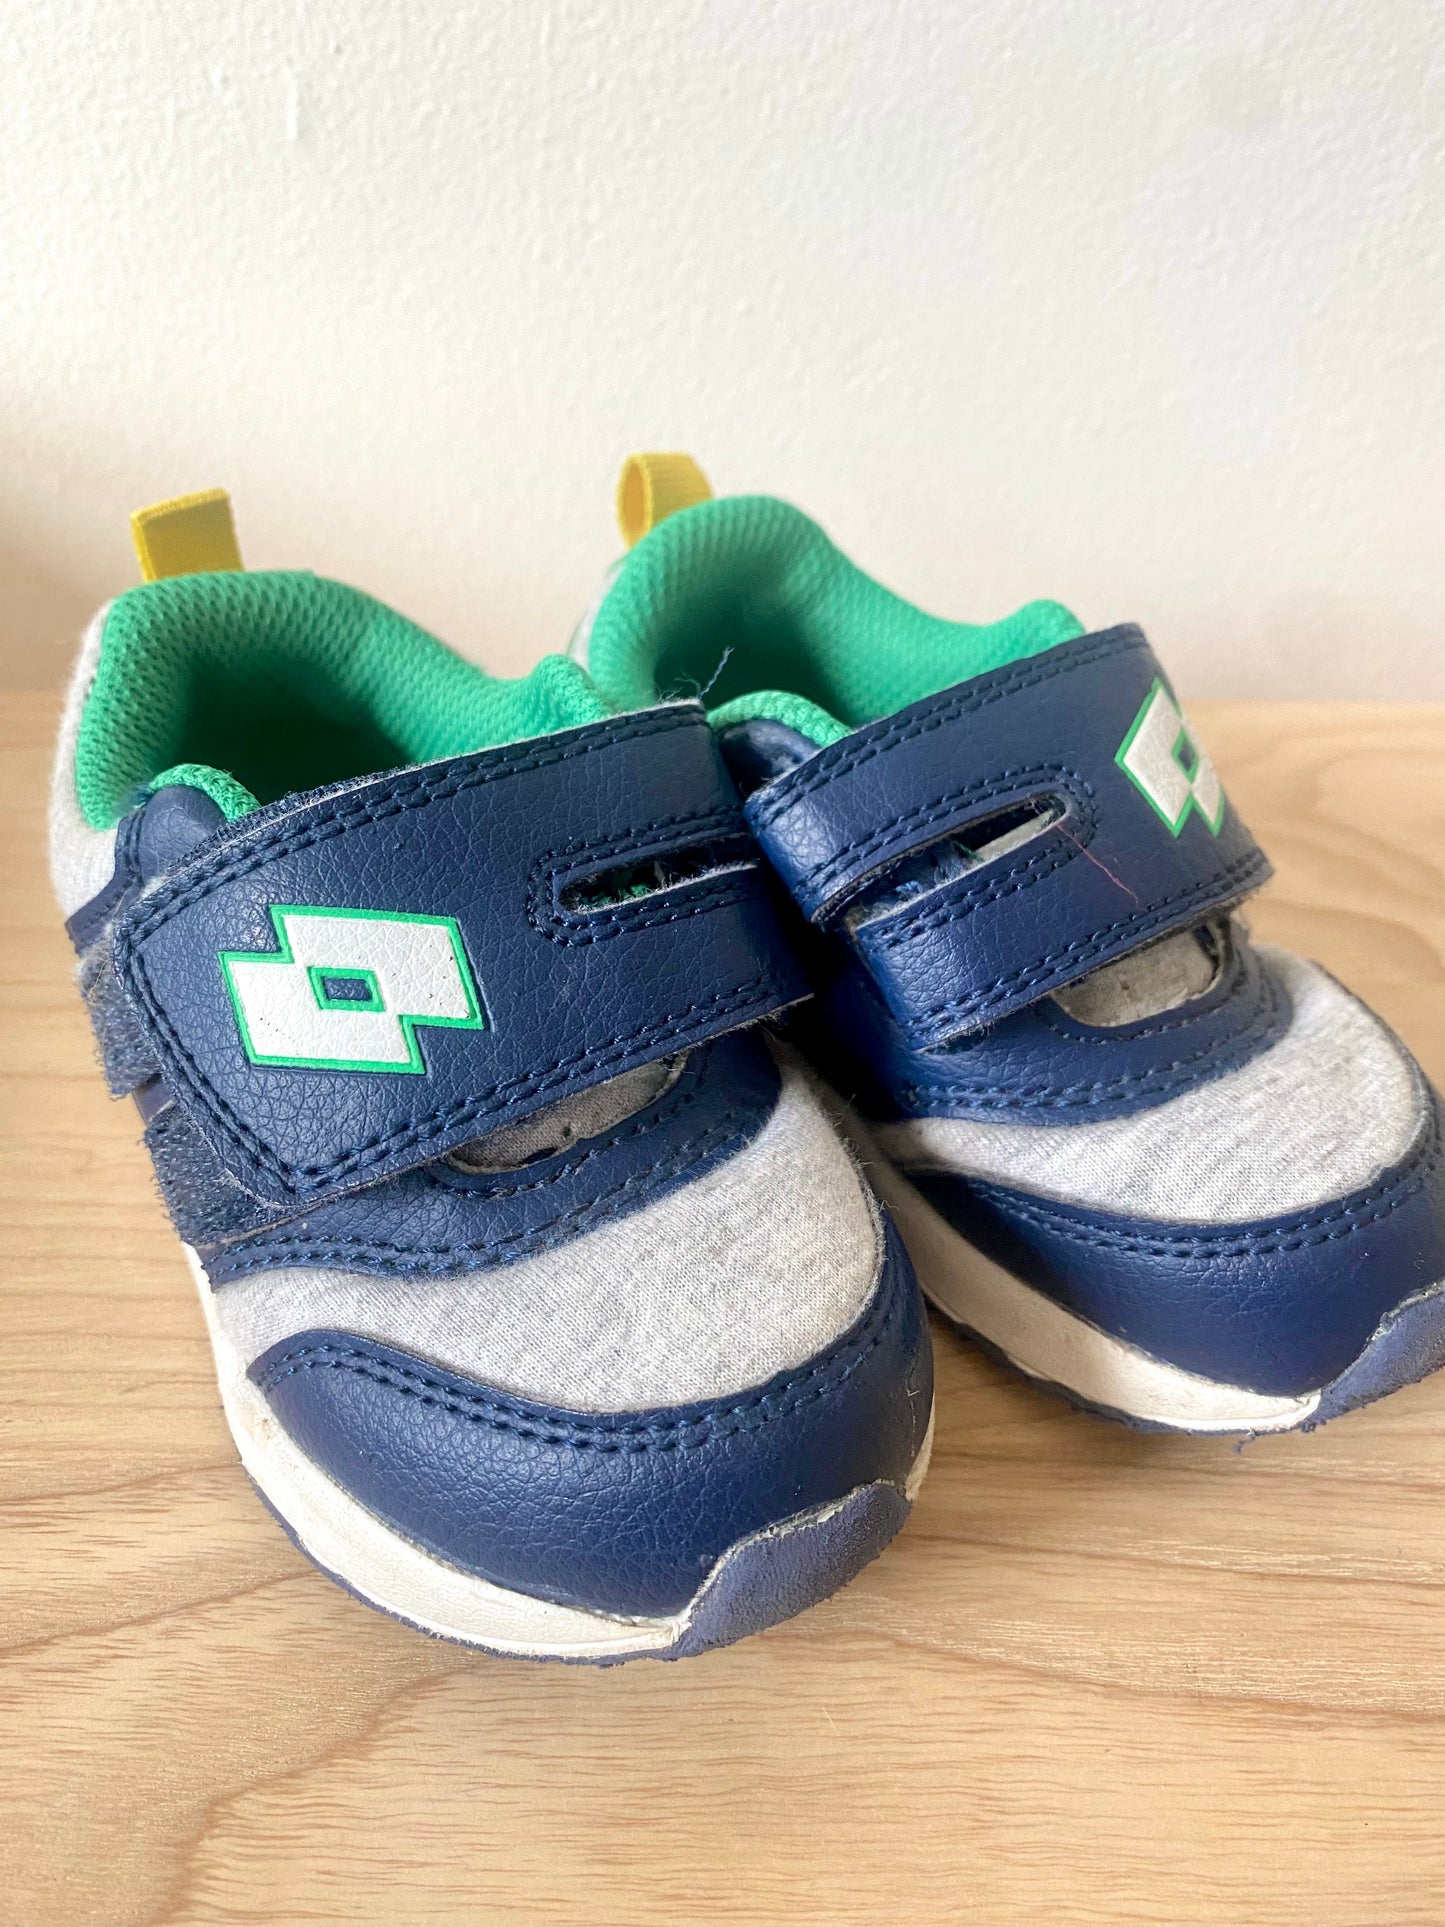 Velcro Lotto Shoes / Size 5 Toddler